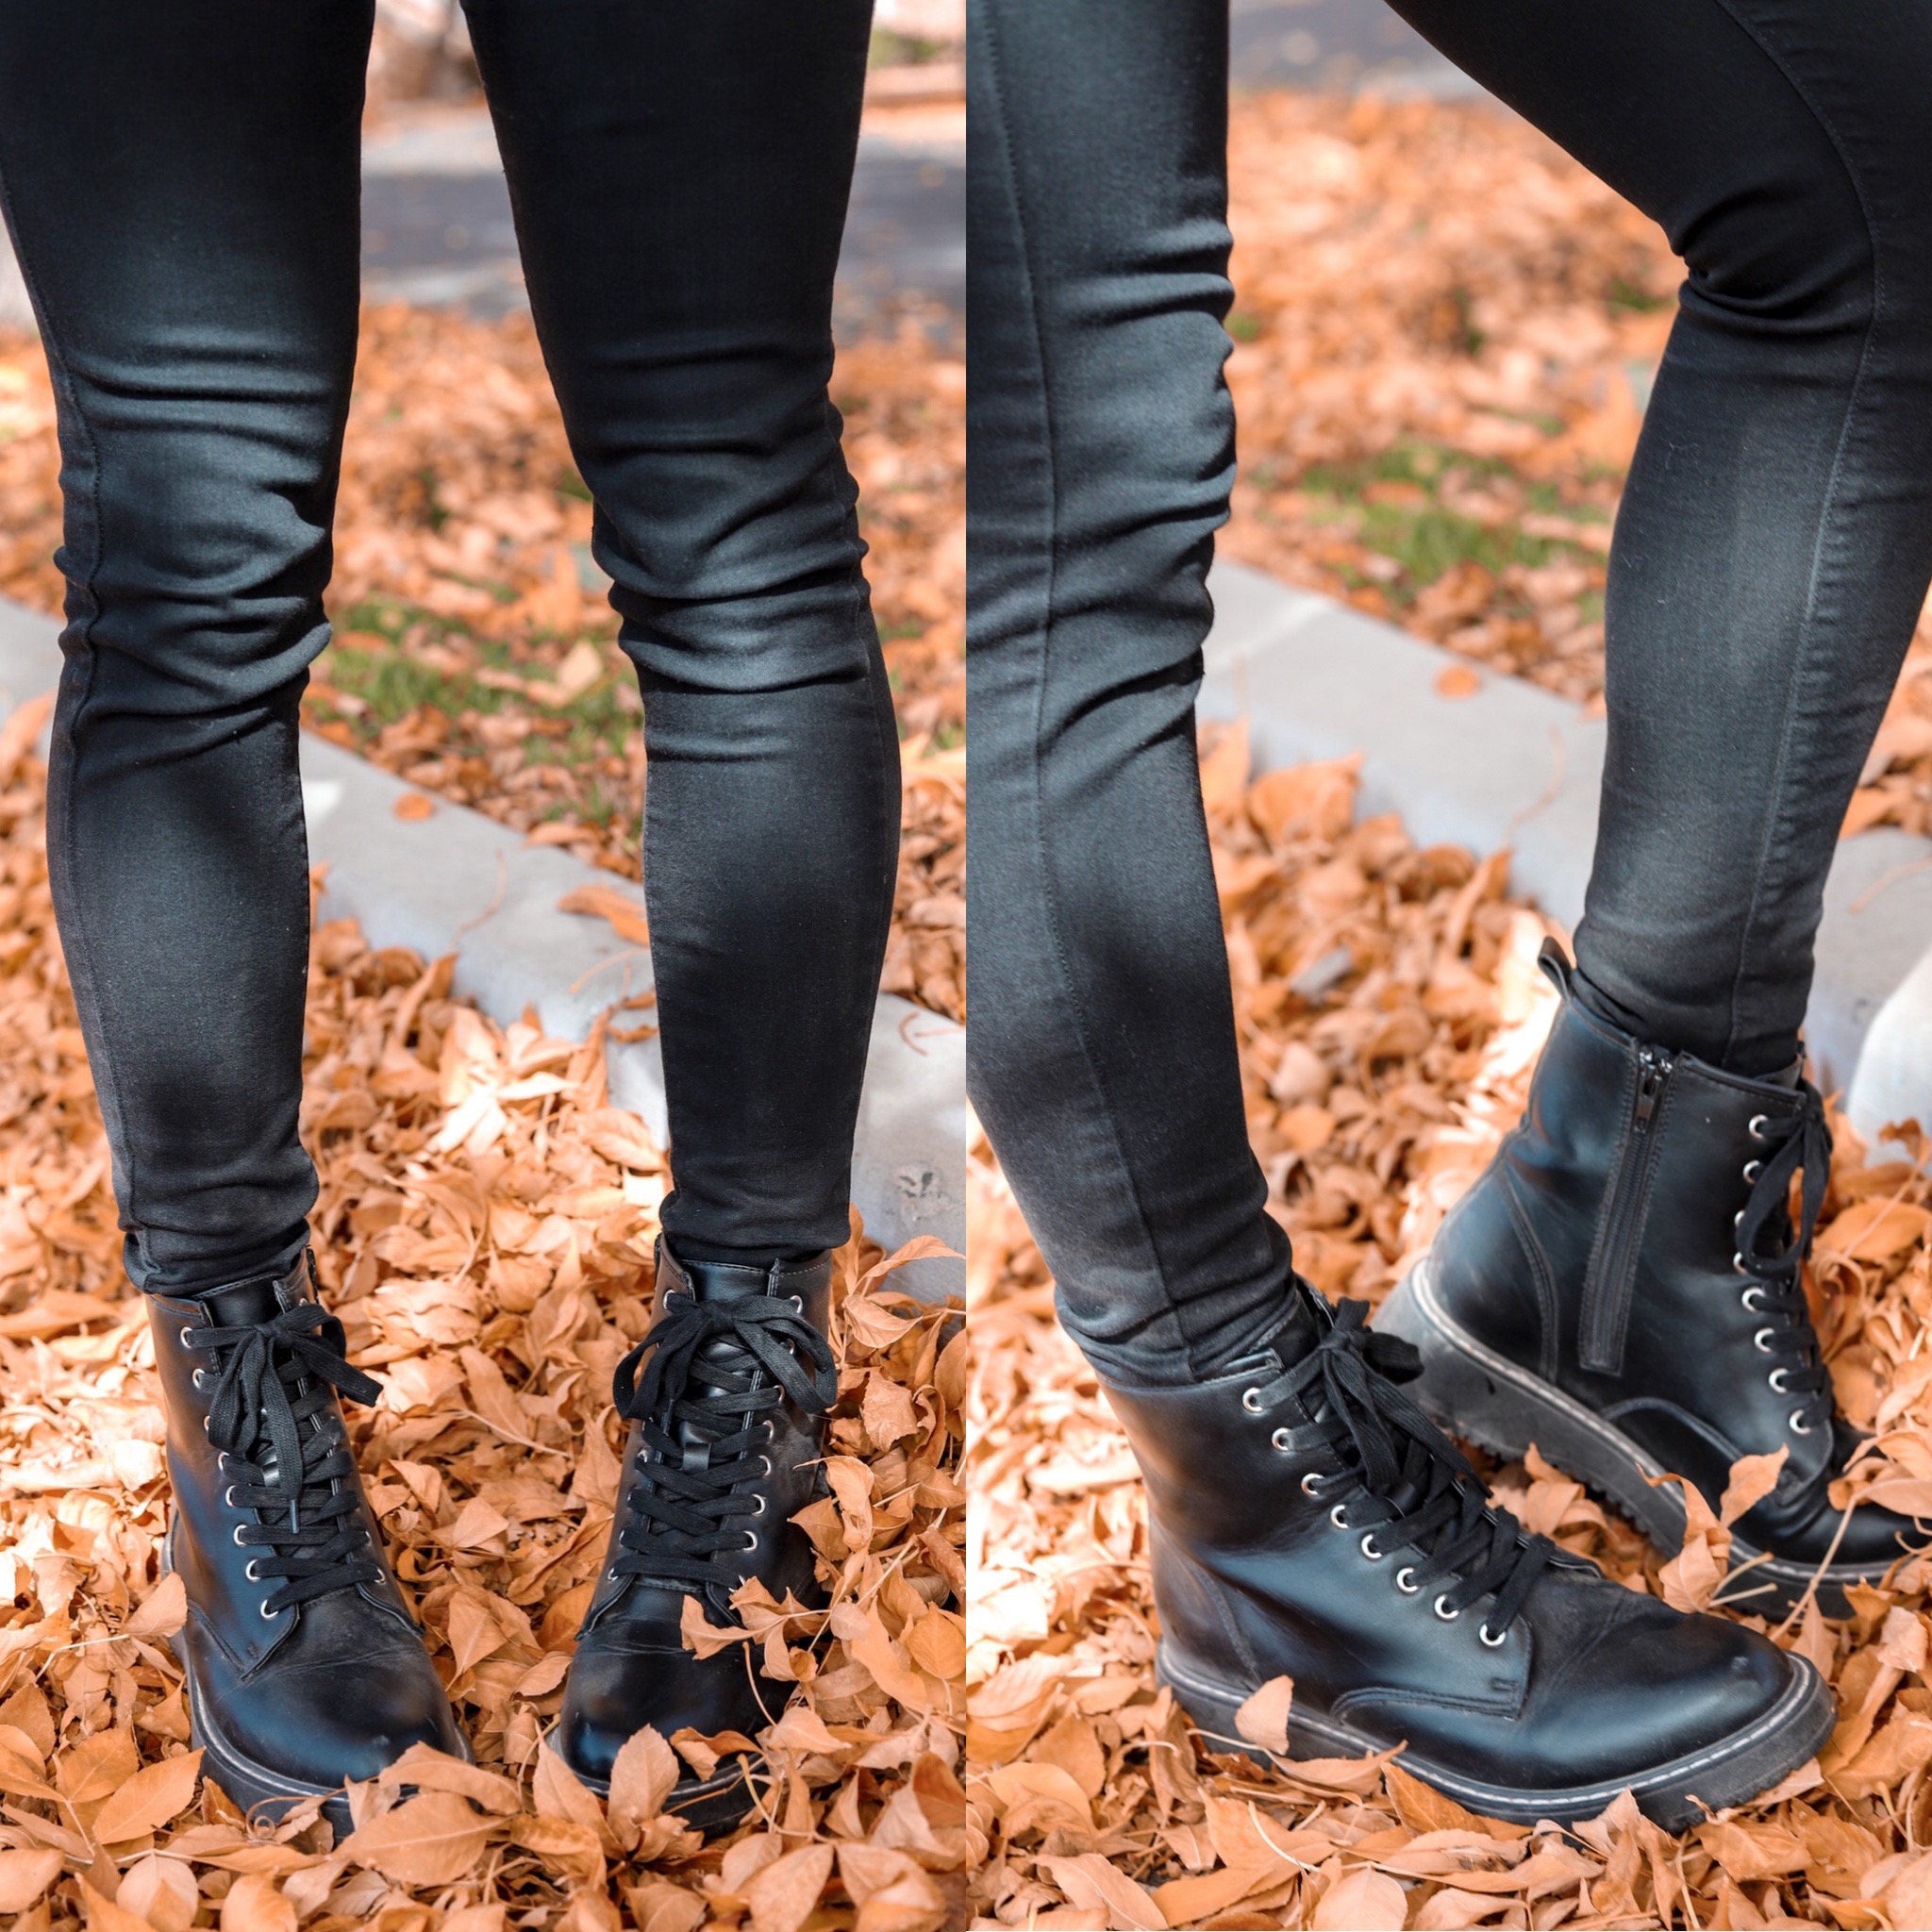 madden girl black lace up boots in fall leaves